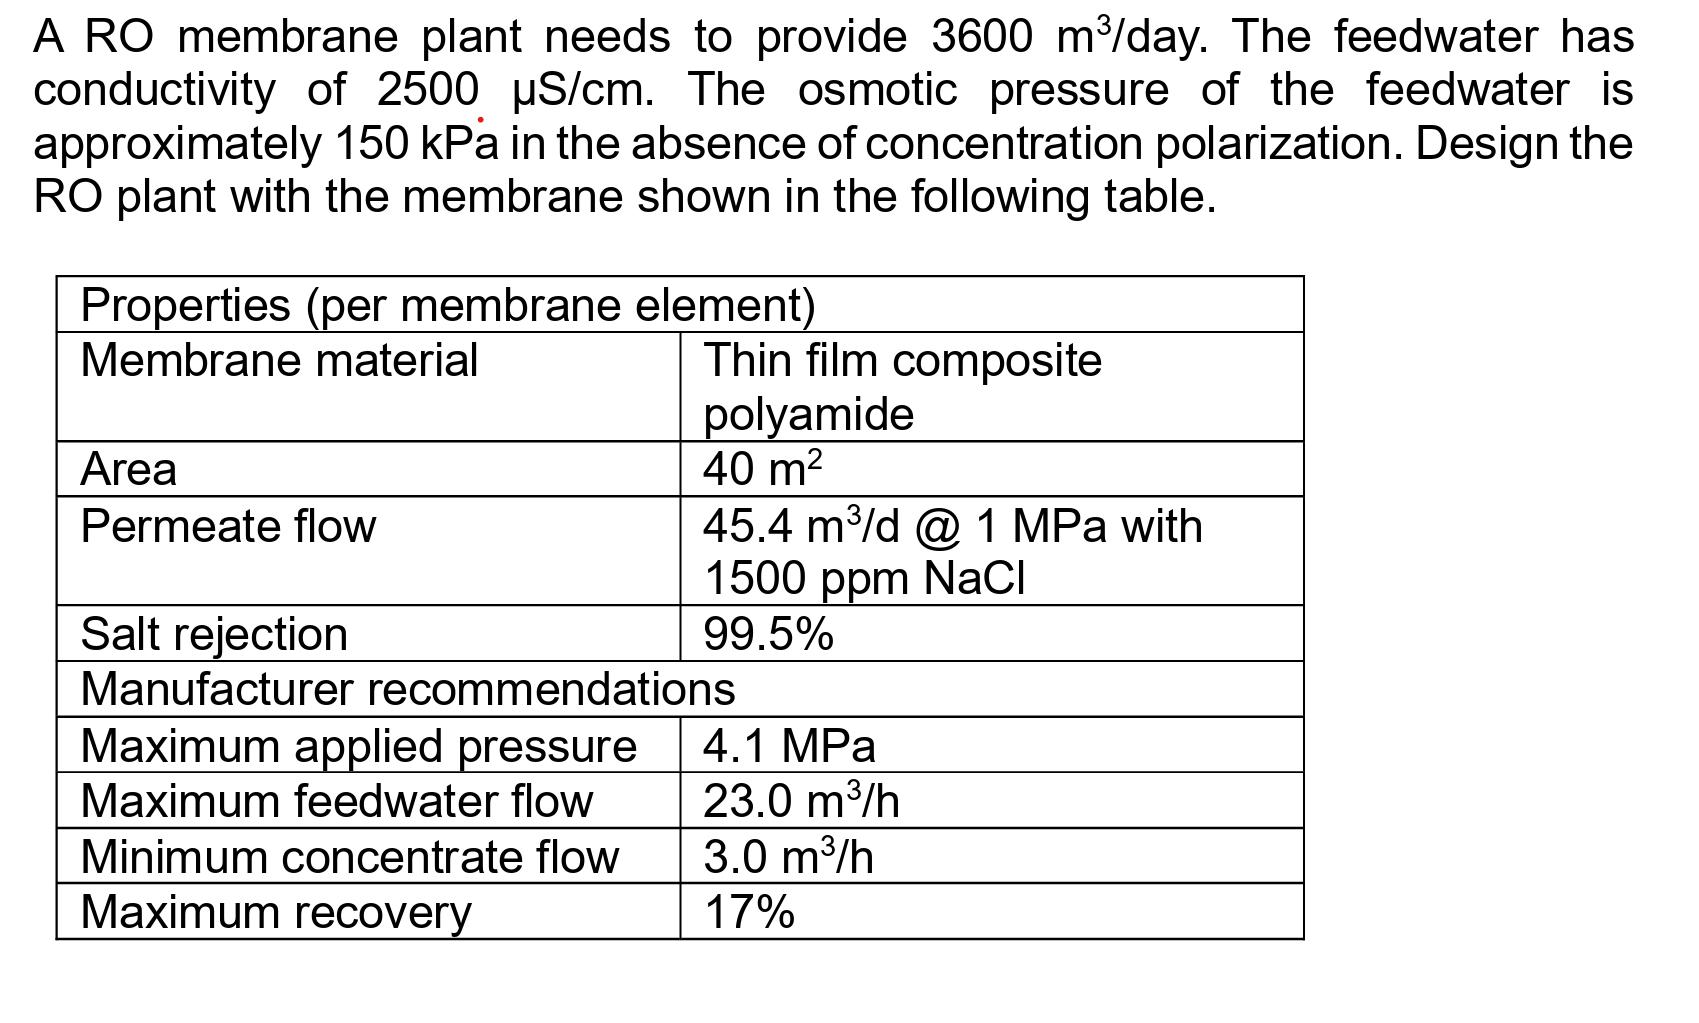 A RO membrane plant needs to provide 3600 m/day. The feedwater has conductivity of 2500 S/cm. The osmotic